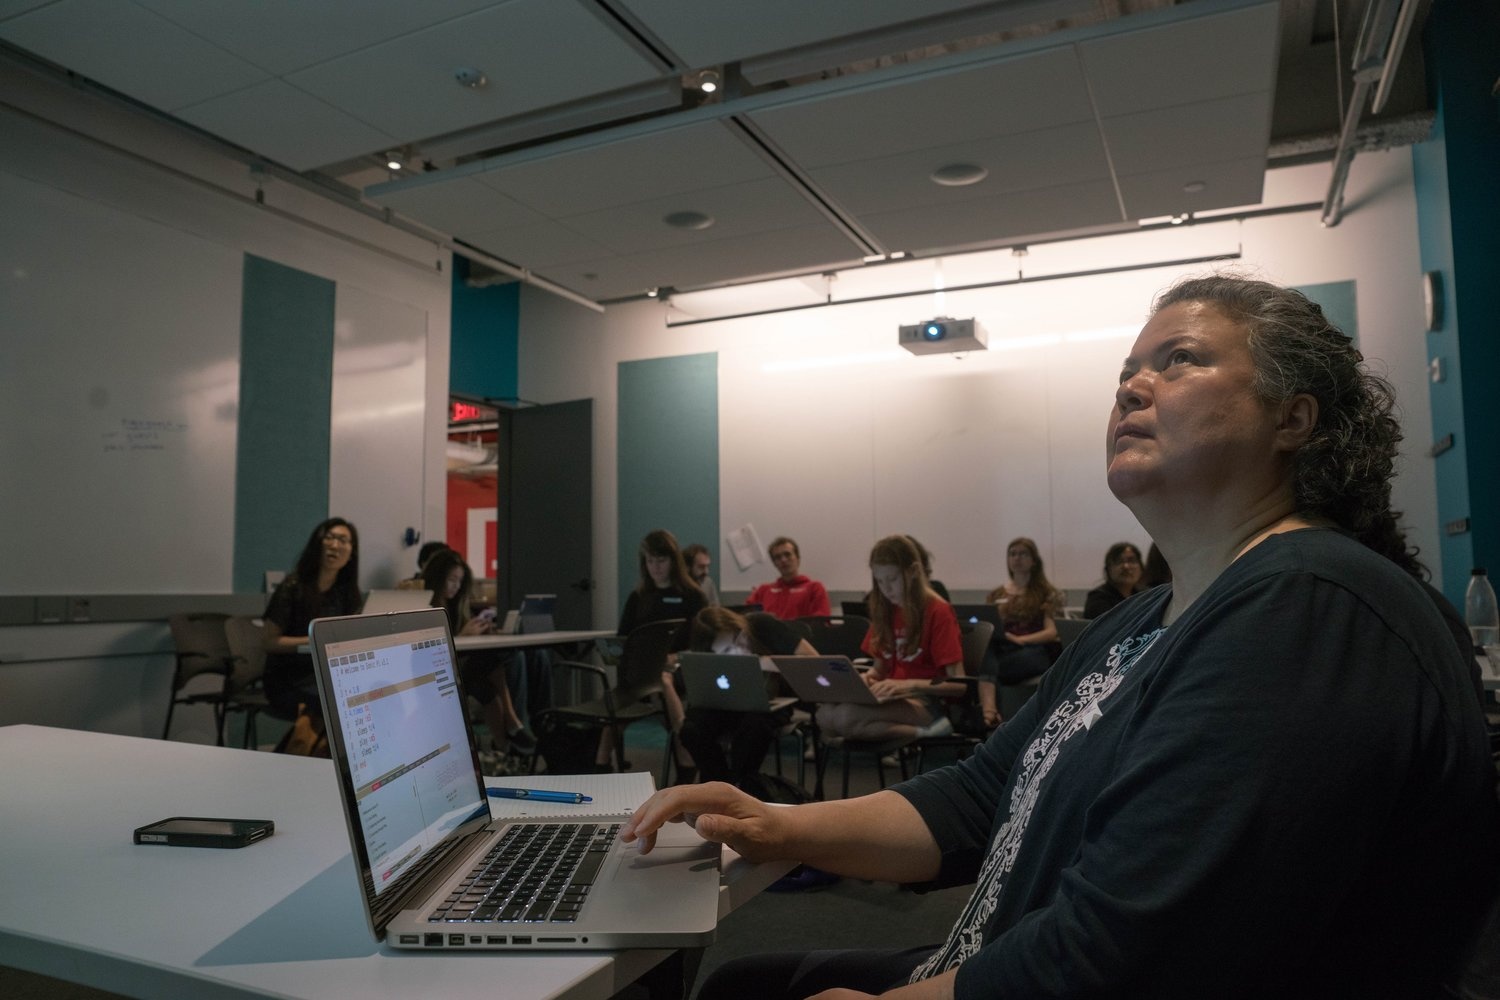 A person with a laptop looking up at the projection screen in a classroom. There a group of people sitting behind her in desks.